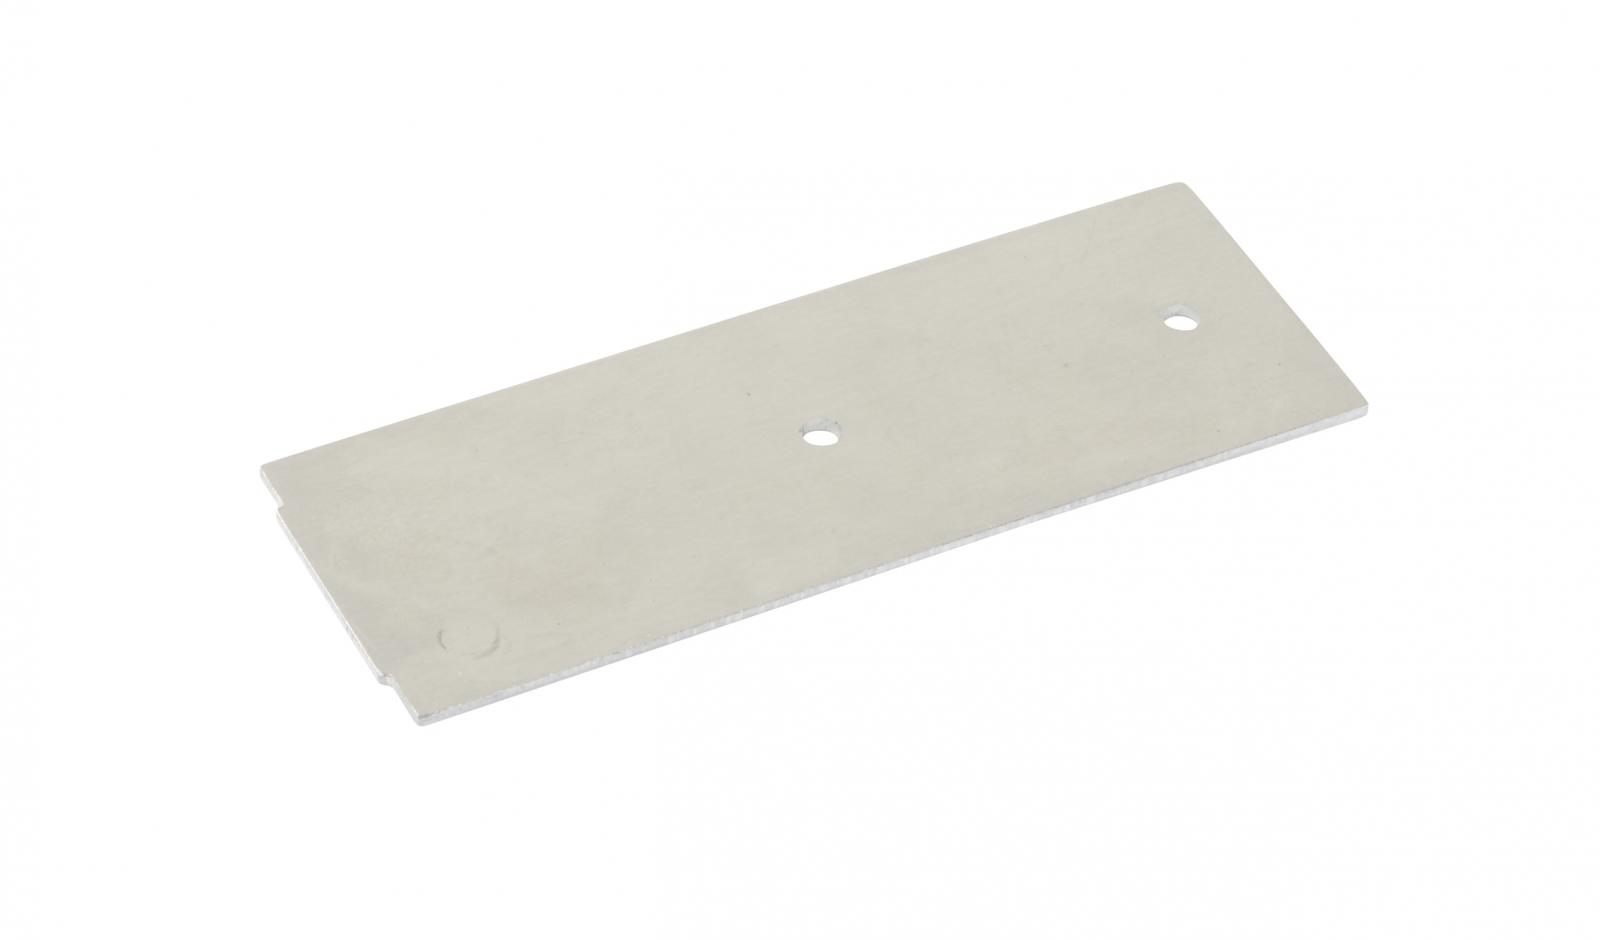 TapeTech® 8" Pressure Plate. Part number 350034